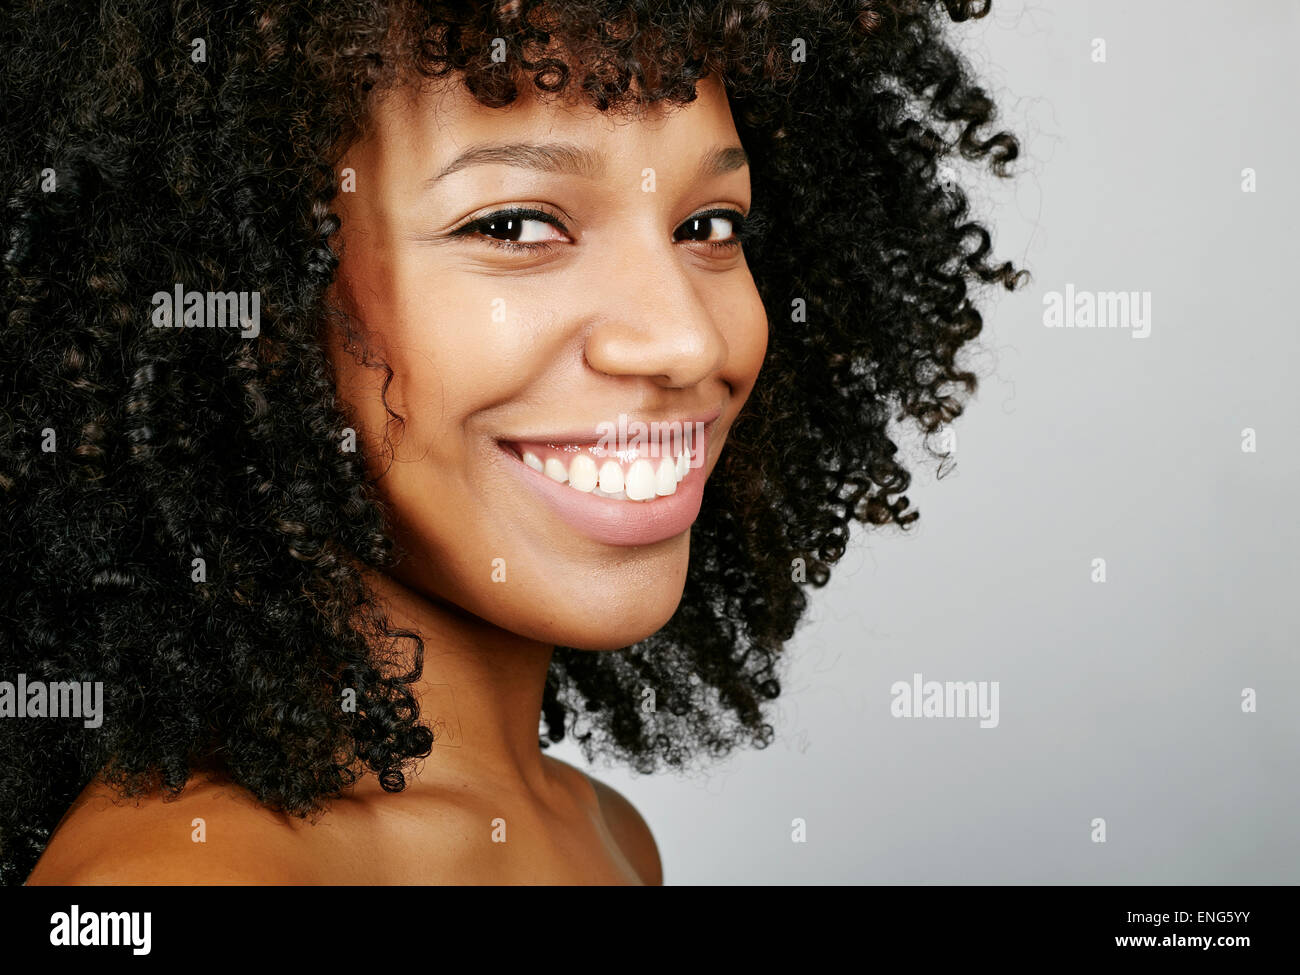 Close up of smiling face of mixed race woman Stock Photo - Alamy